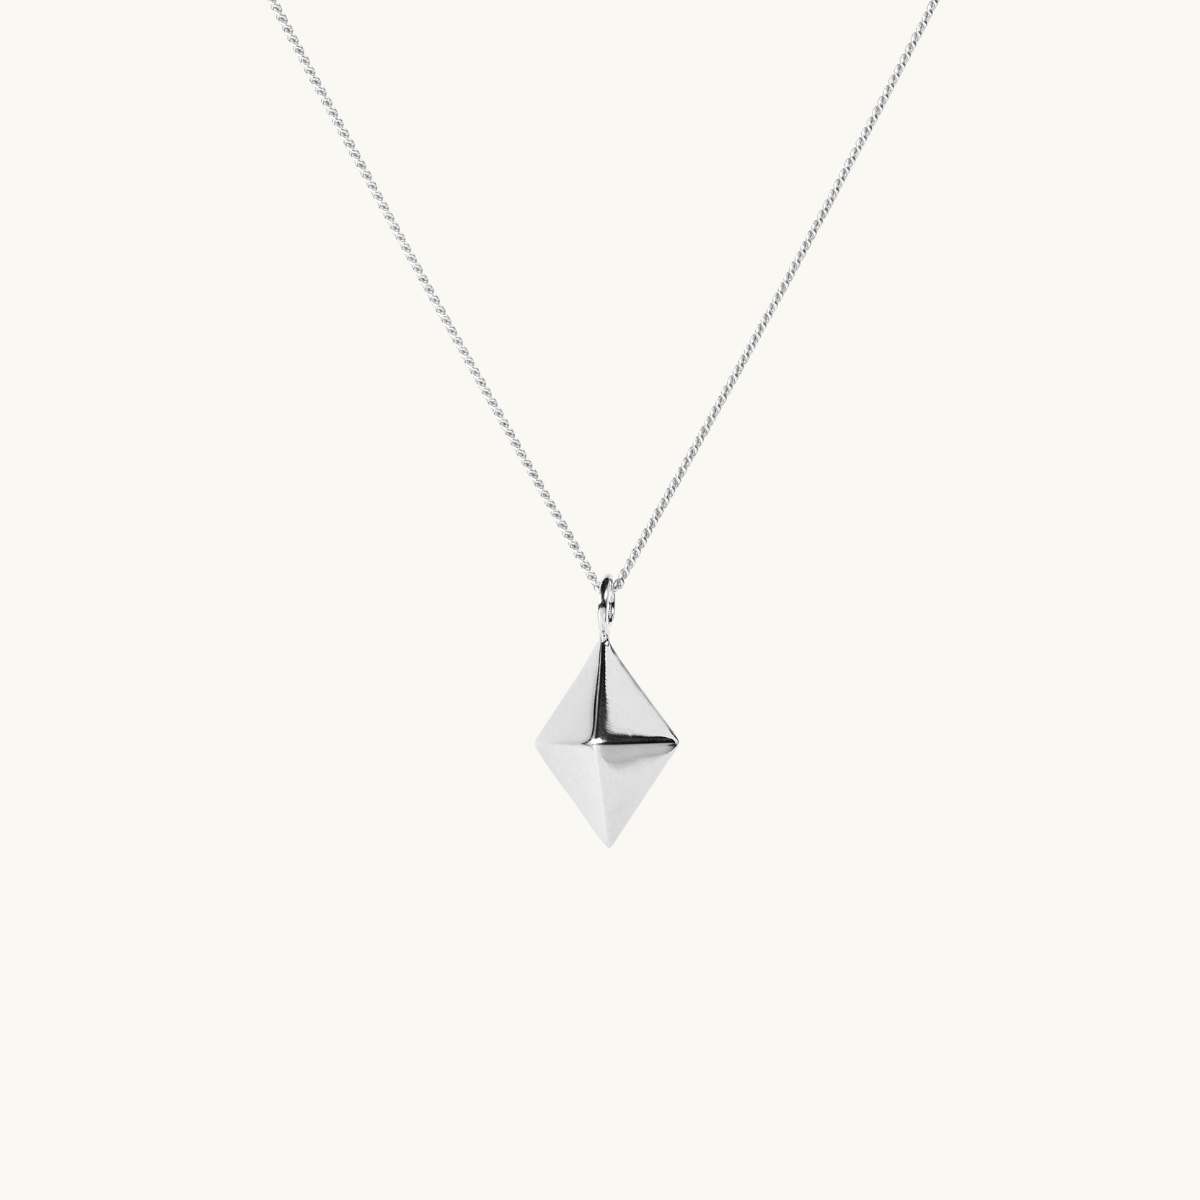 PPG DIAMOND NECKLACE SILVER LARGE - 50 CM in the group SHOP / NECKLACES at EMMA ISRAELSSON (neck113-50)